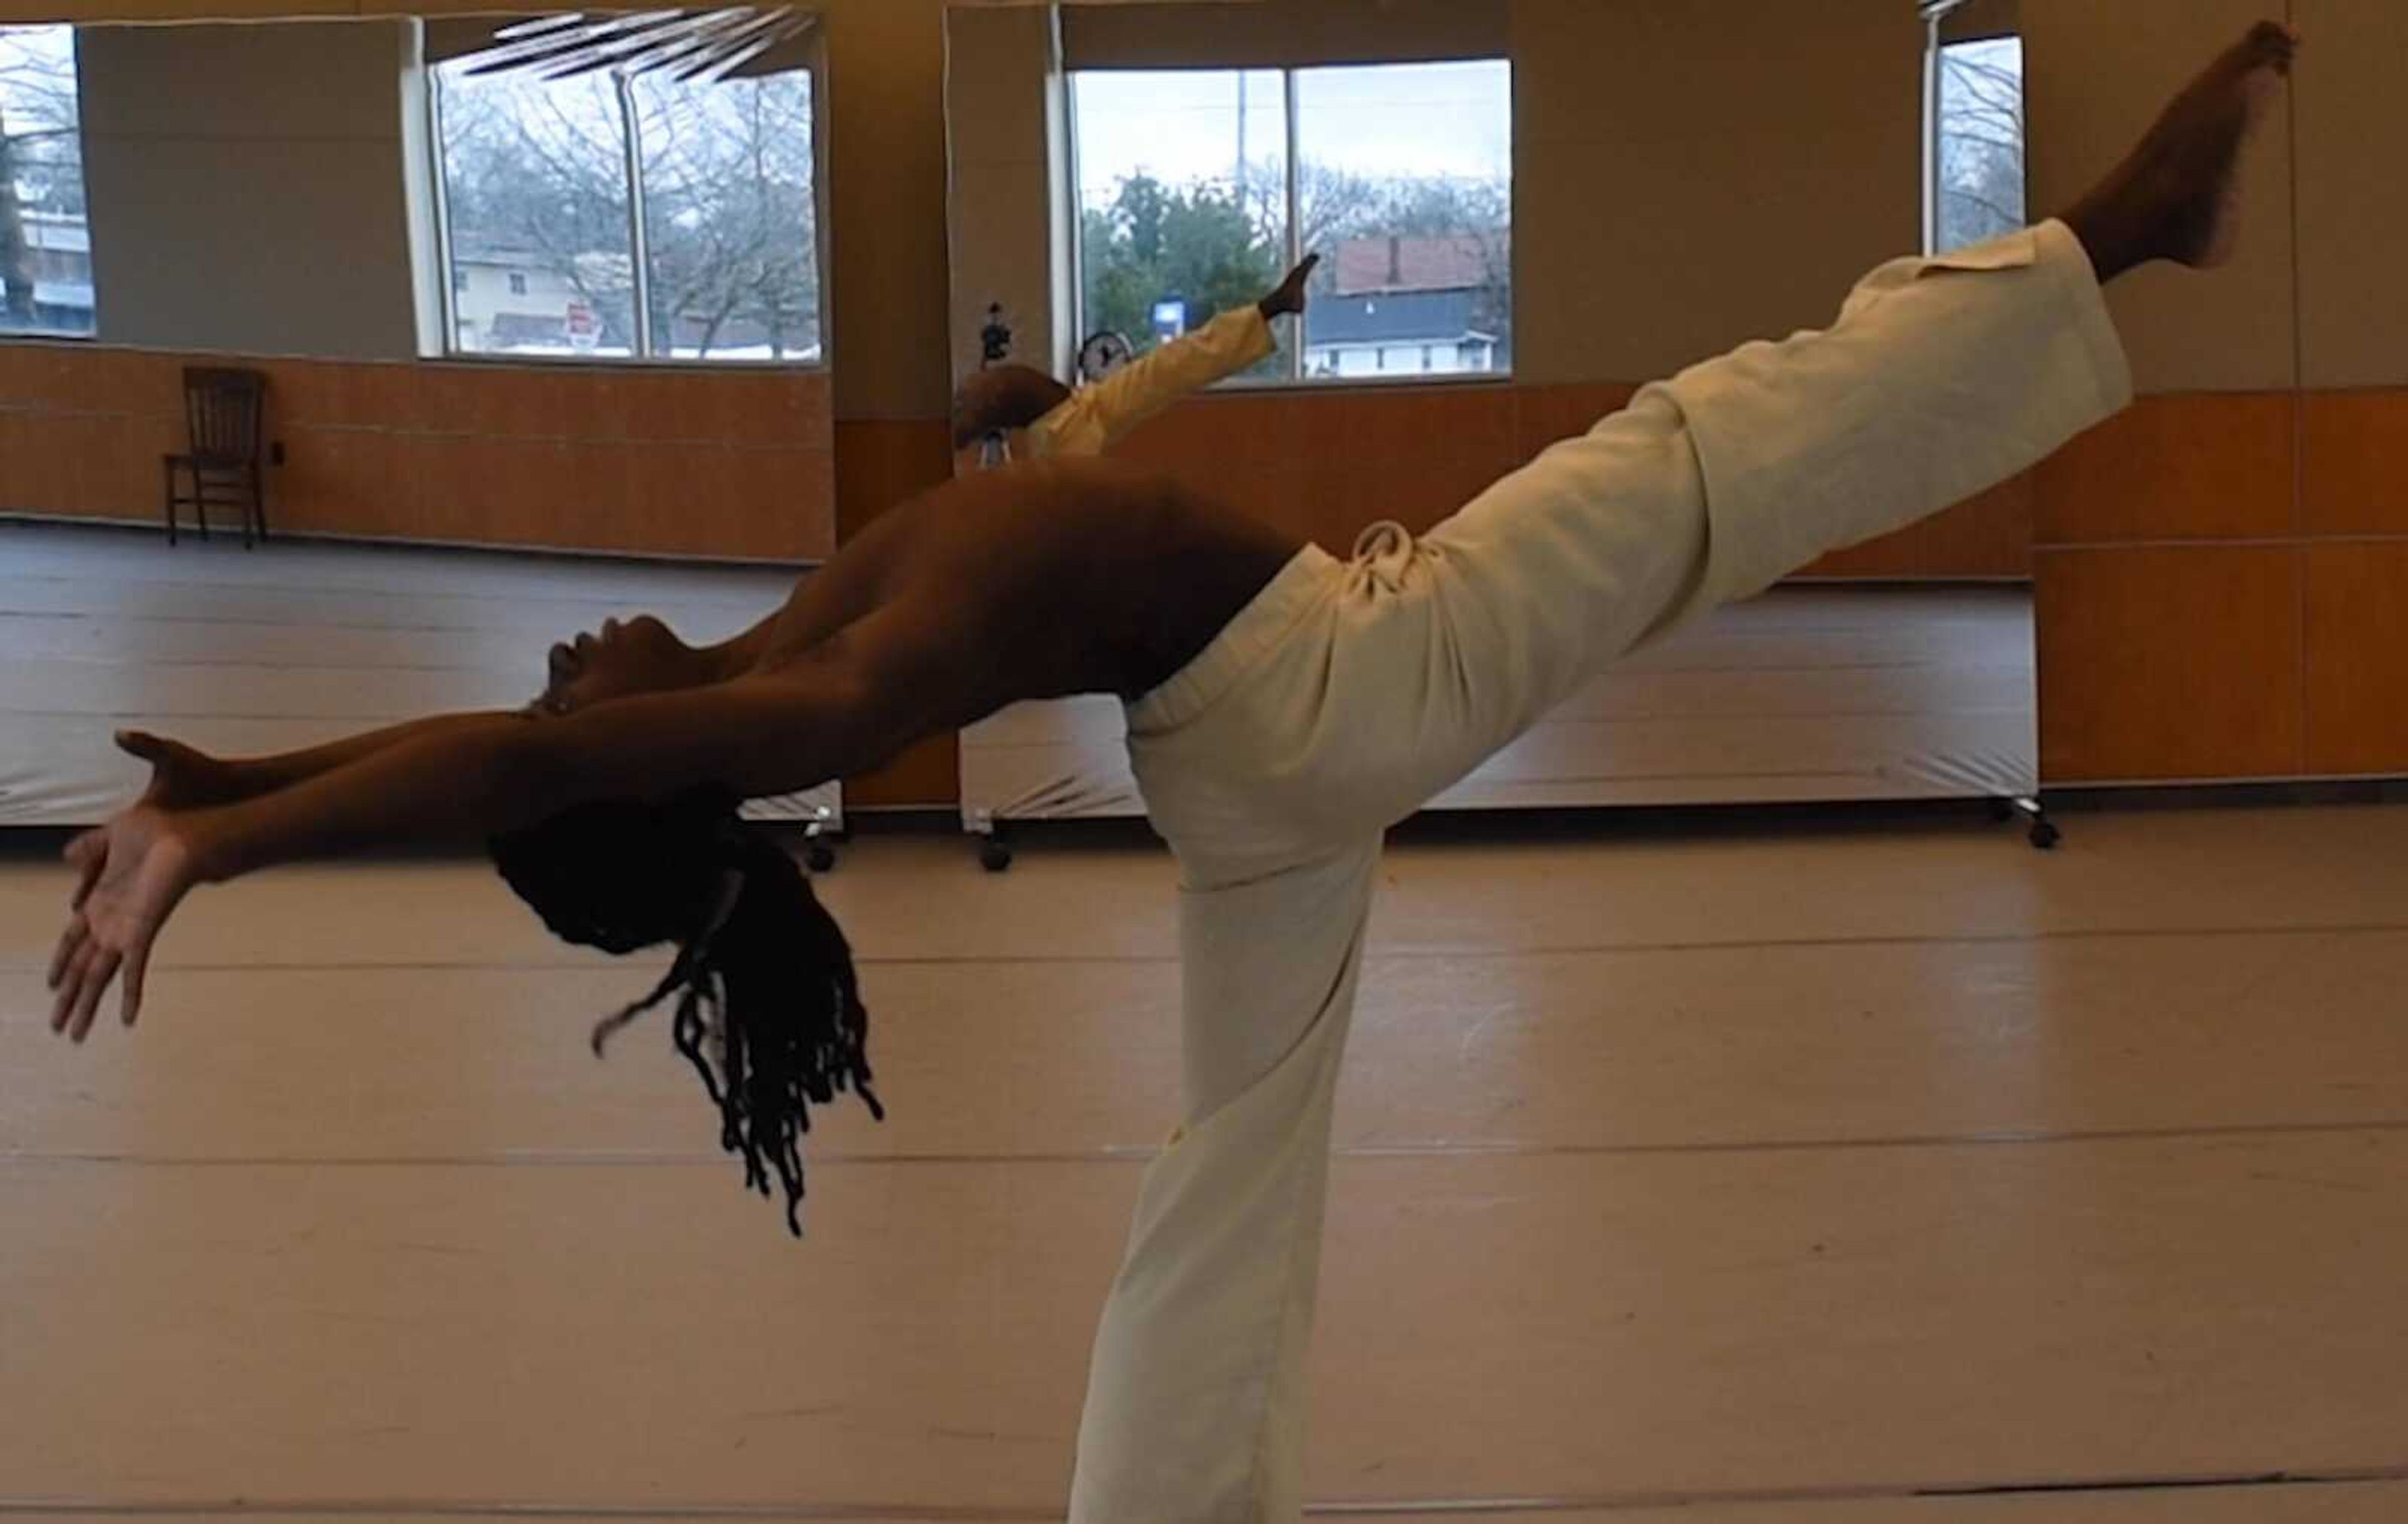 De’Vontae Graham rehearsing his routine at Southeast River Campus for the upcoming “Bridges”event.